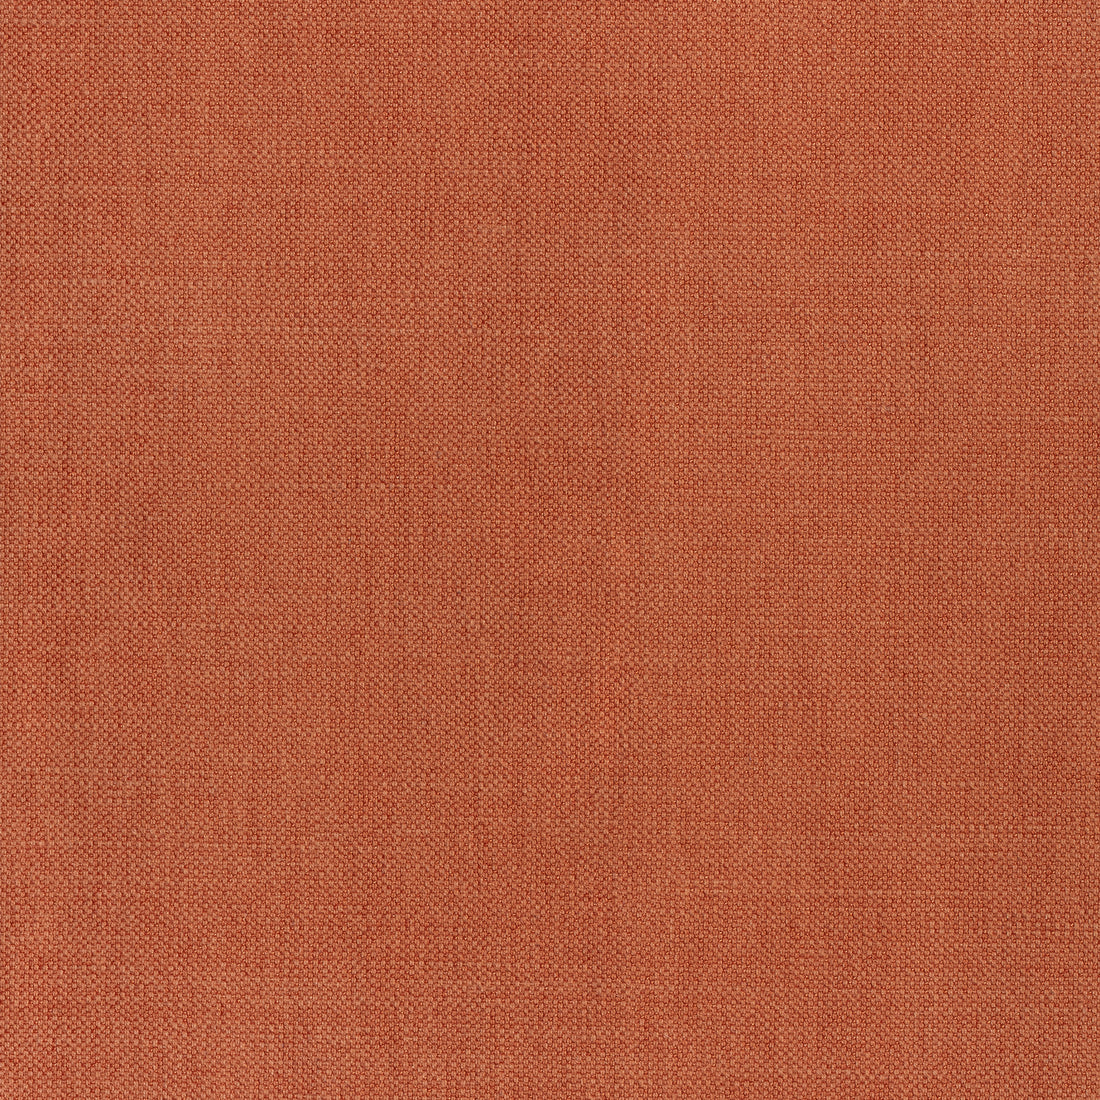 Prisma fabric in autumn color - pattern number W70125 - by Thibaut in the Woven Resource Vol 12 Prisma Fabrics collection